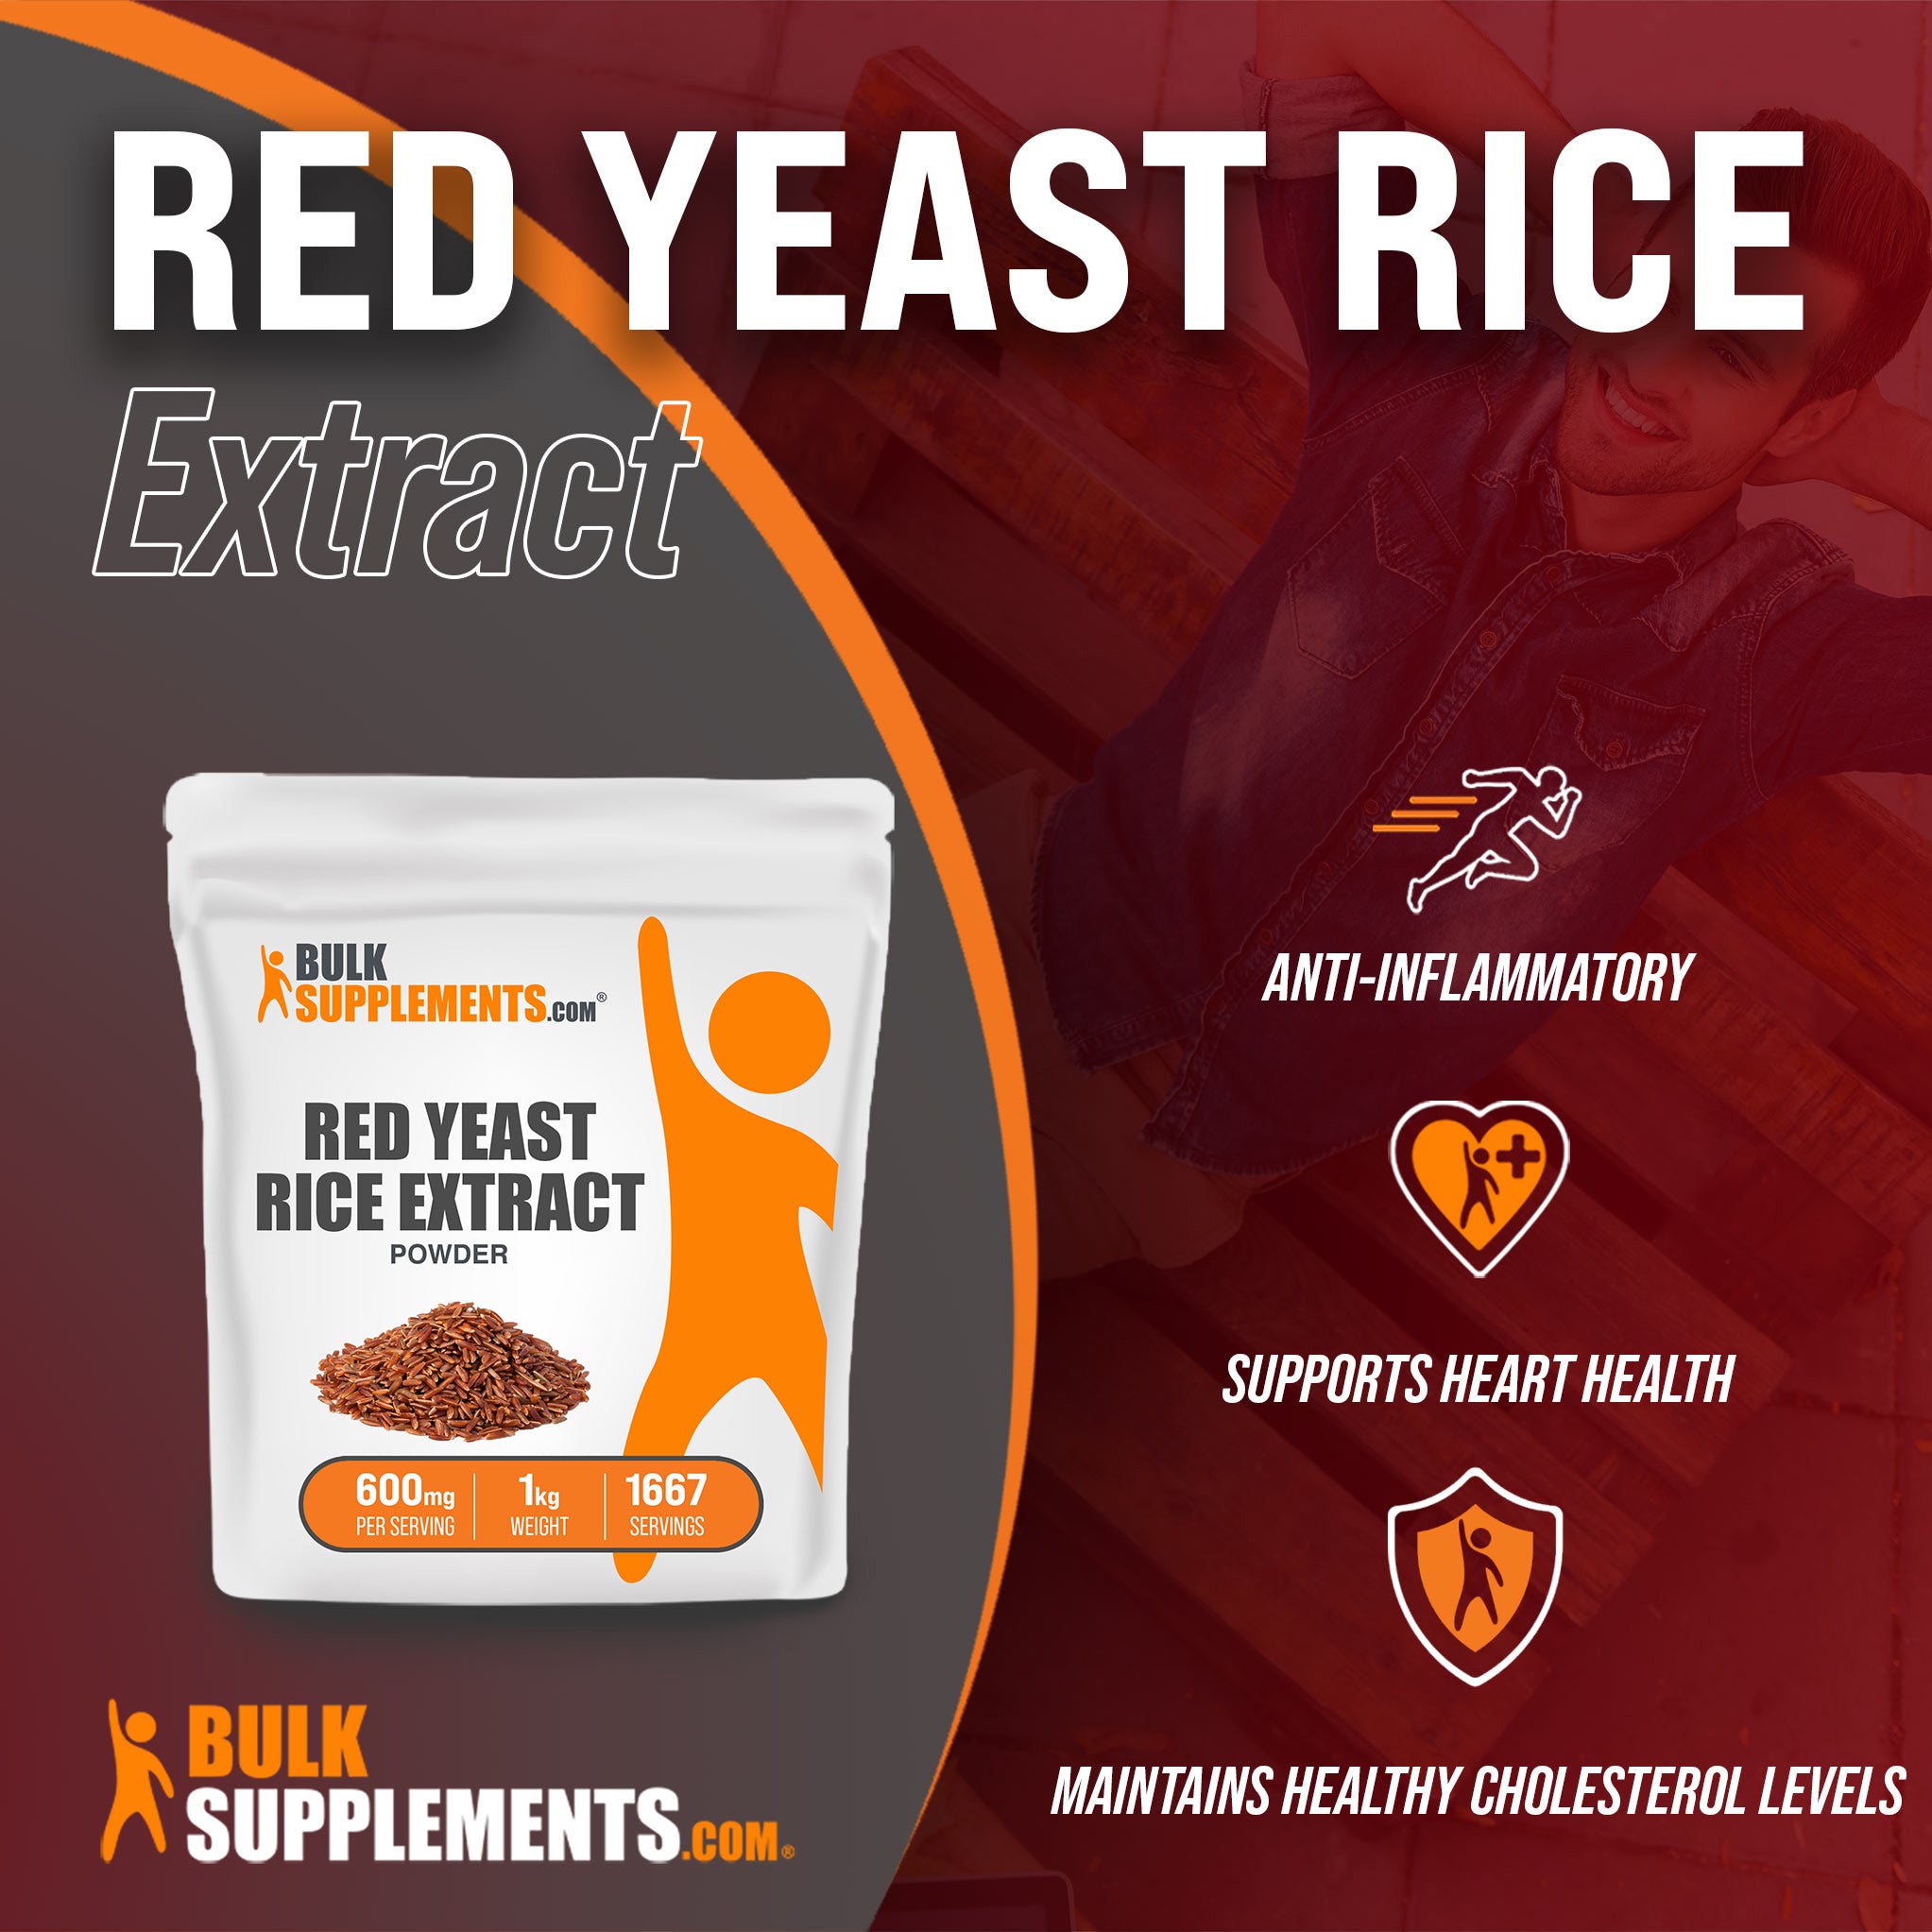 Benefits of Red Yeast Rice Extract: anti-inflammatory, supports heart health, maintains healthy cholesterol levels